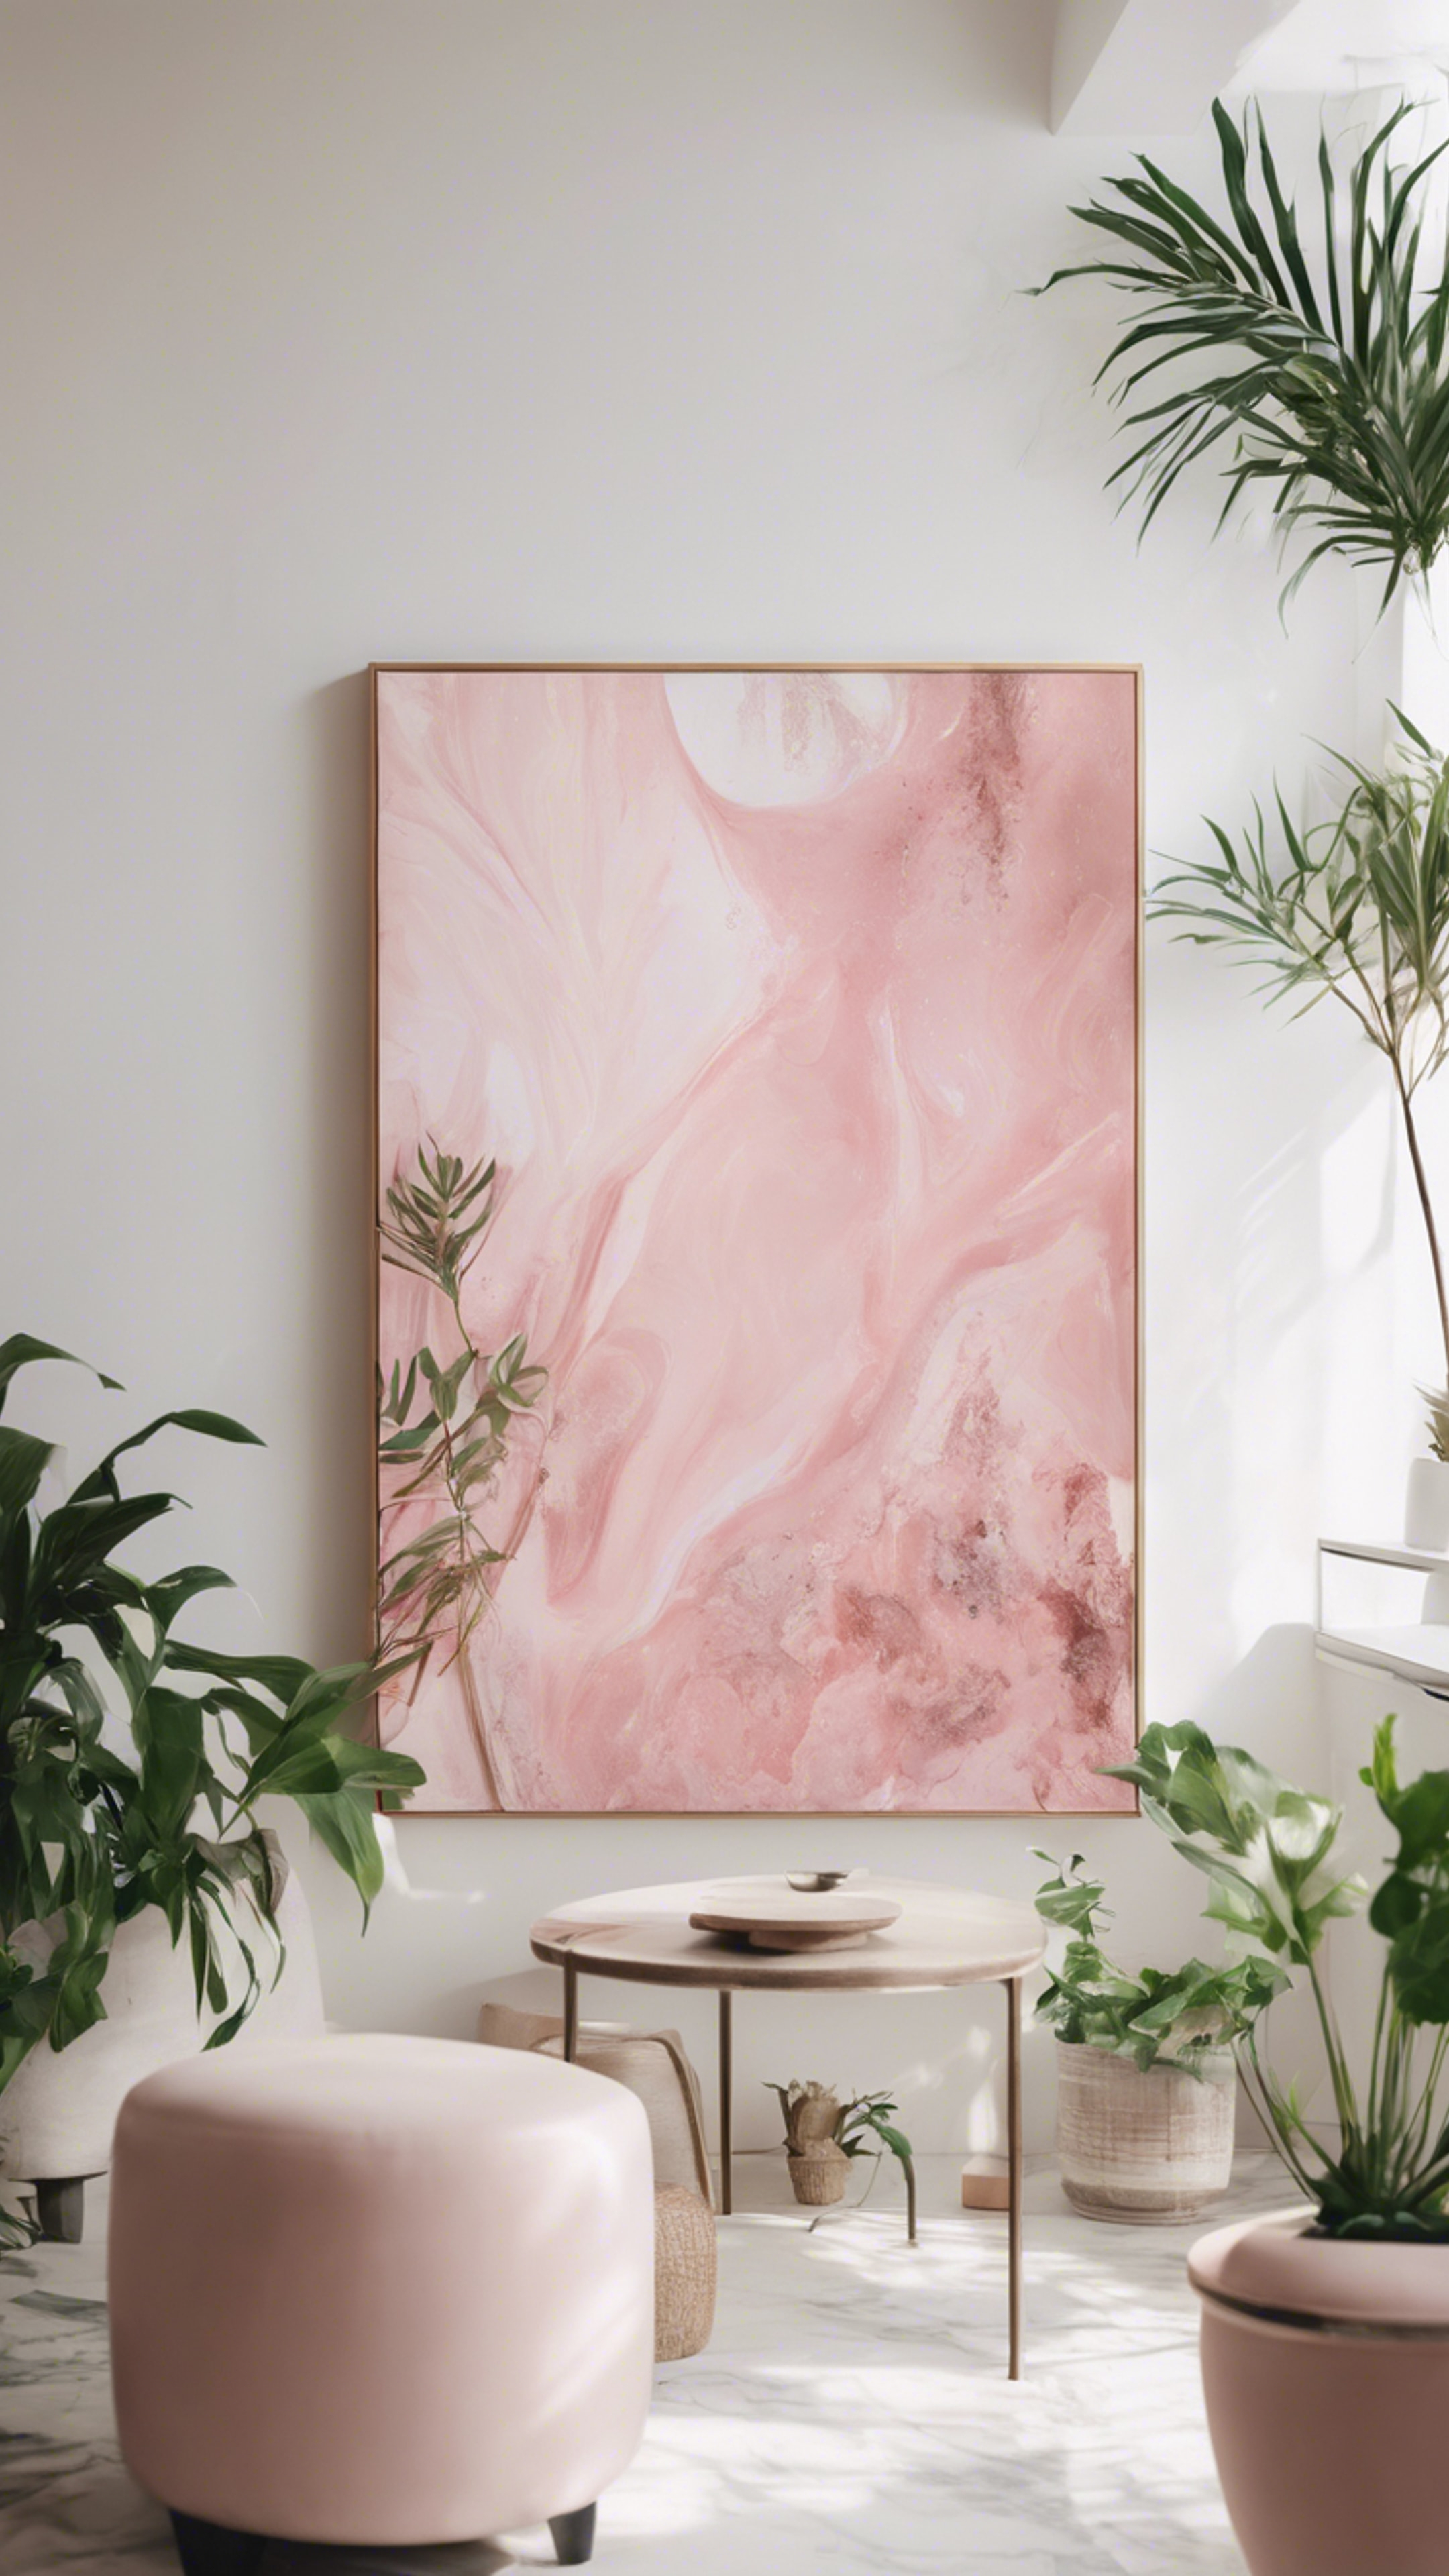 A soft pink abstract painting on a white wall surrounded by indoor plants, enhancing the aesthetic of the room Валлпапер[9fa4f1f3650f4fbb9955]